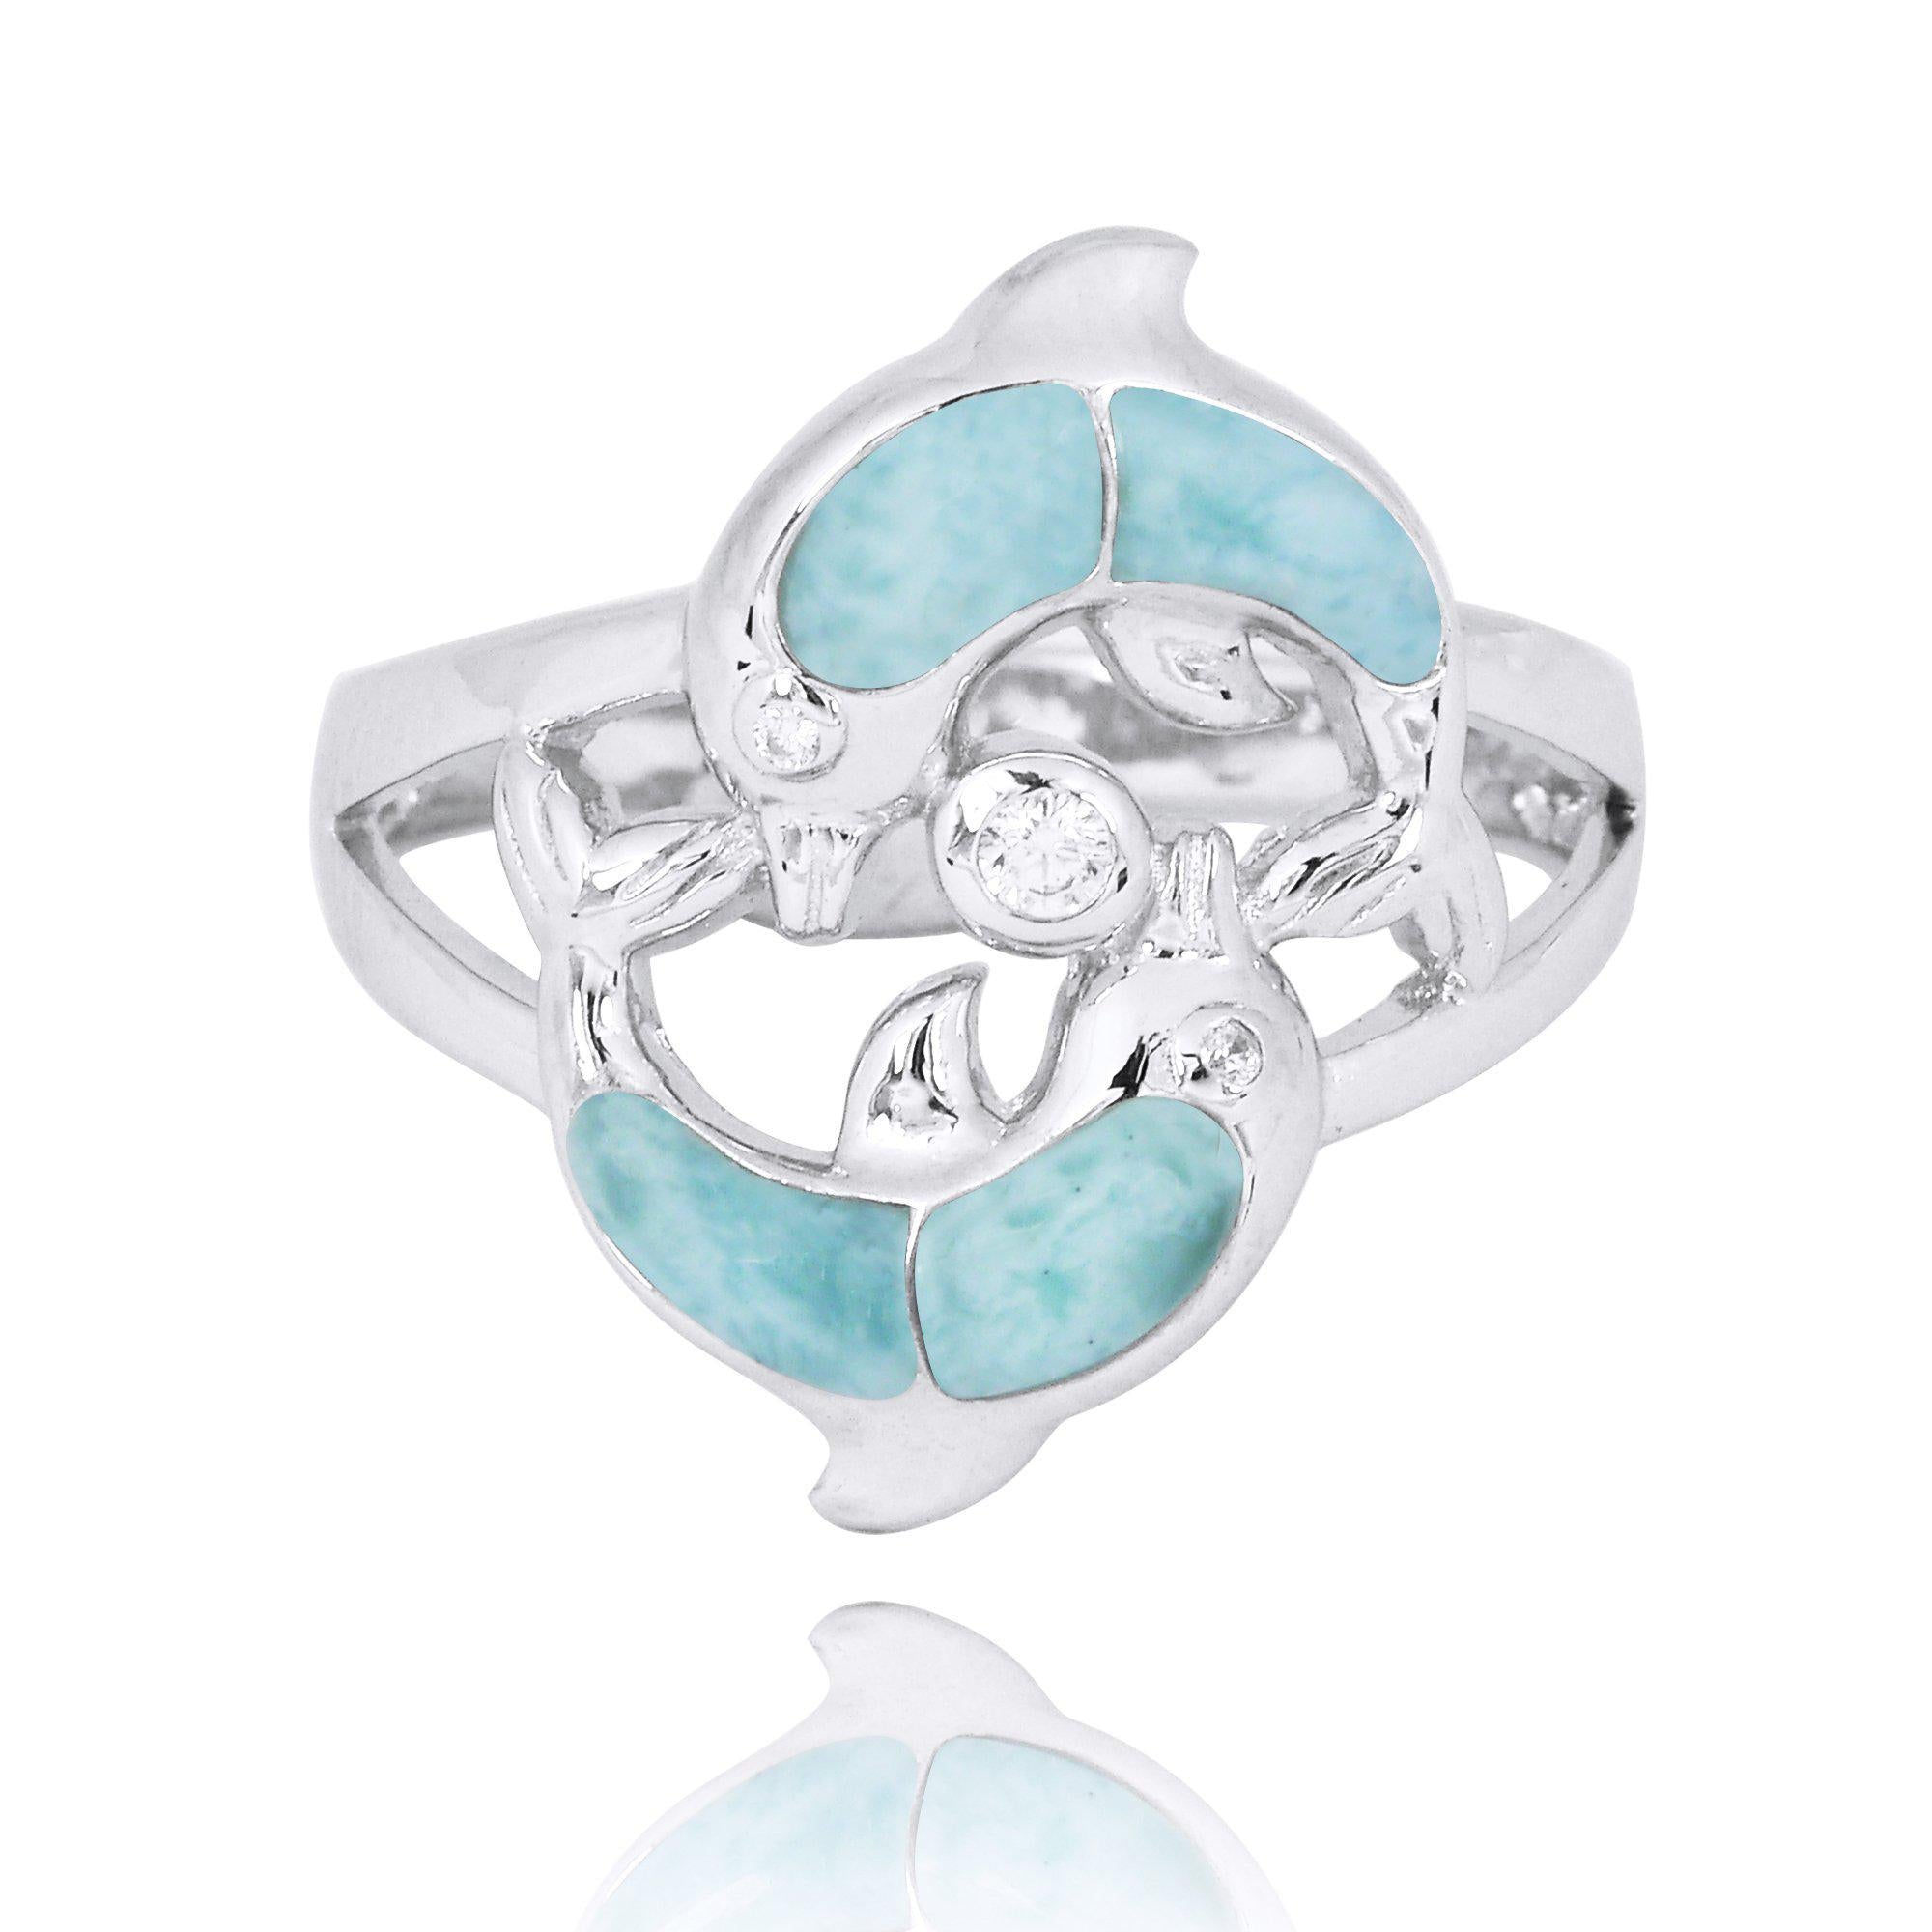 Twin Dolphins Ring with Larimar and White CZ